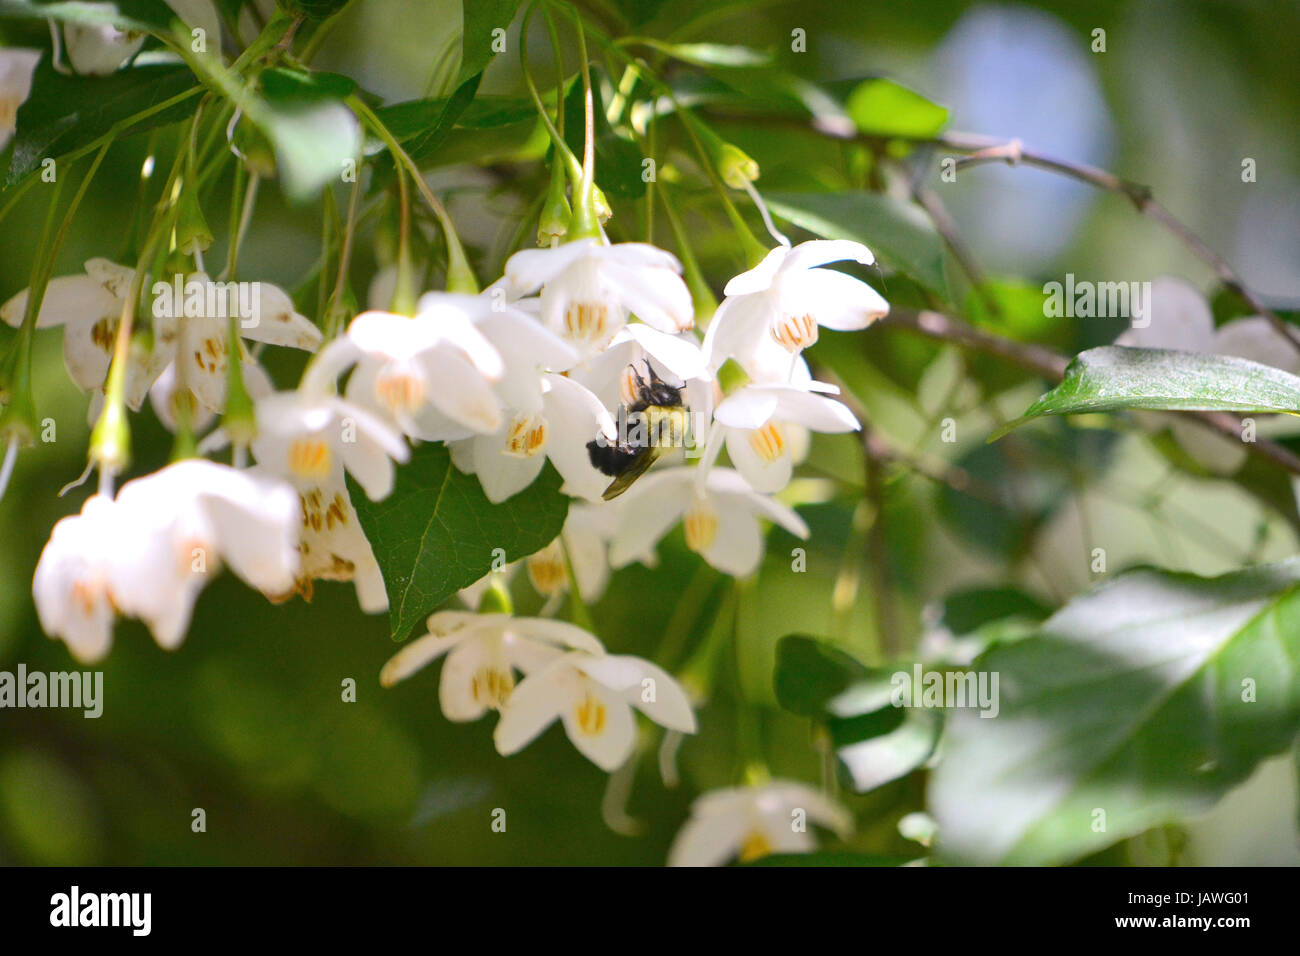 Bumblebee isolated in a Japanese snowbell tree, with bright blue sky and green leaves in so ft focus at the background. Stock Photo